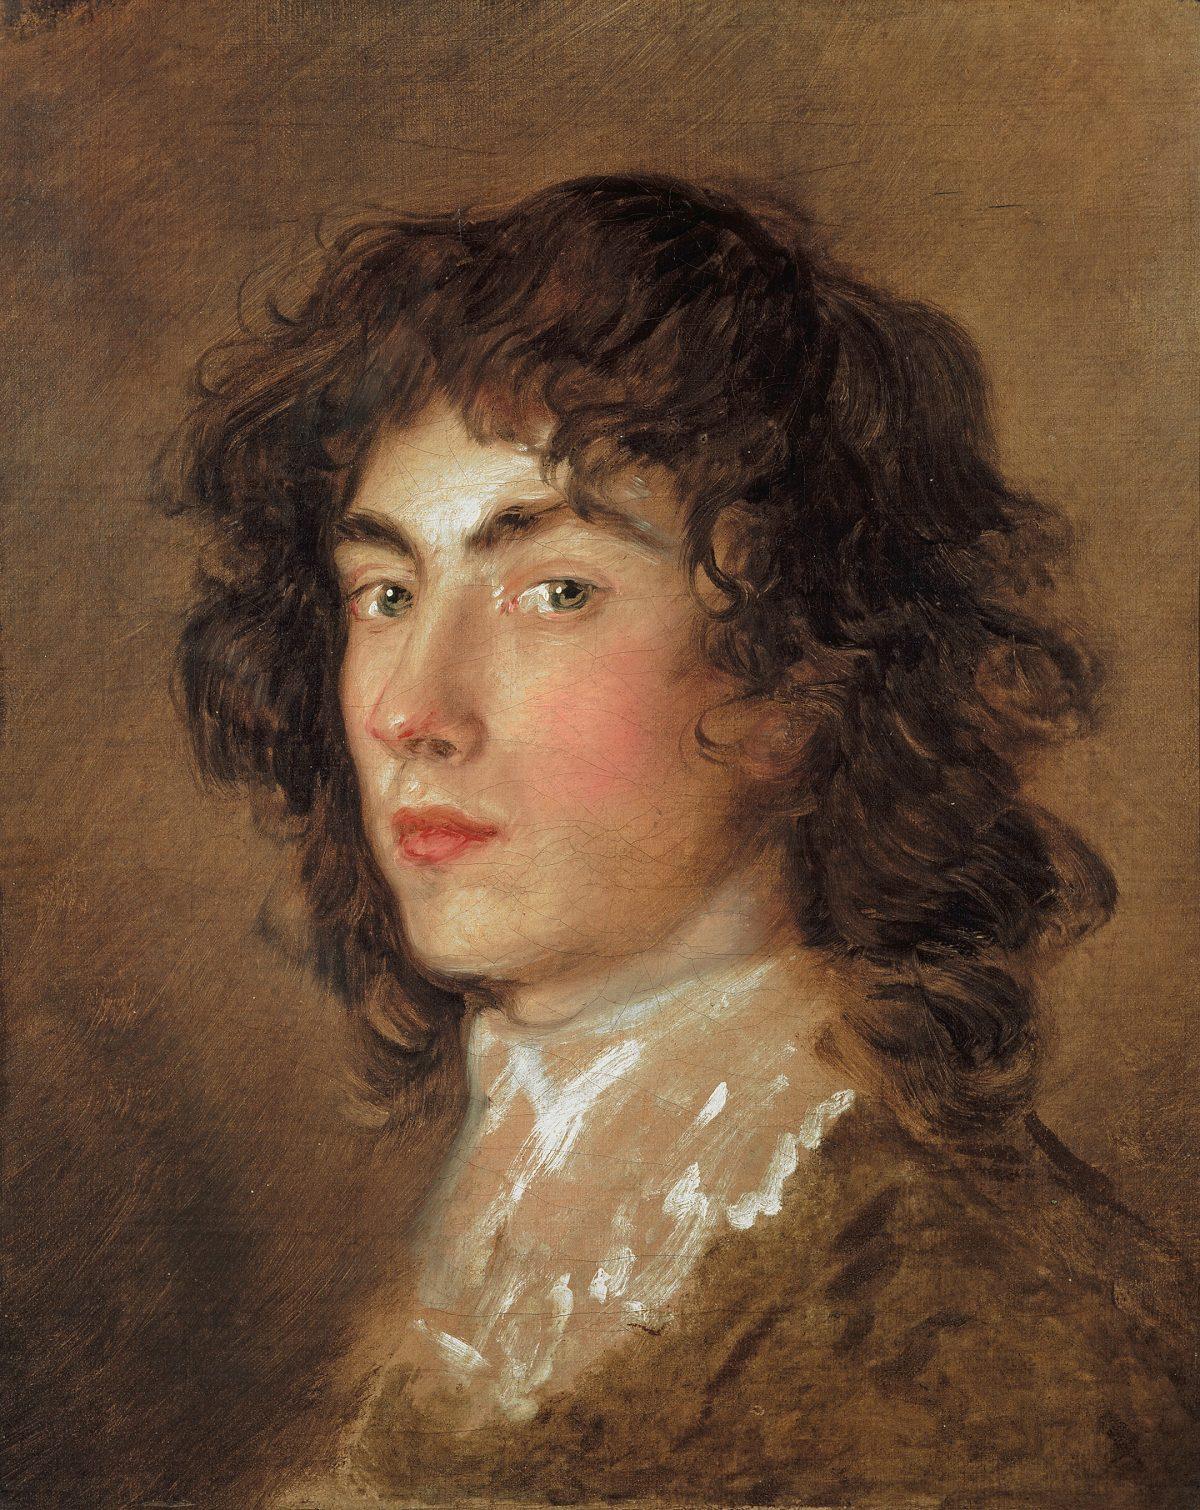 “Gainsborough Dupont, the Artist’s Nephew,” circa 1770–1775, by Thomas Gainsborough. Oil on canvas. Bequeathed by Lady d’Abernon, 1954, Tate, London. (Tate, London)